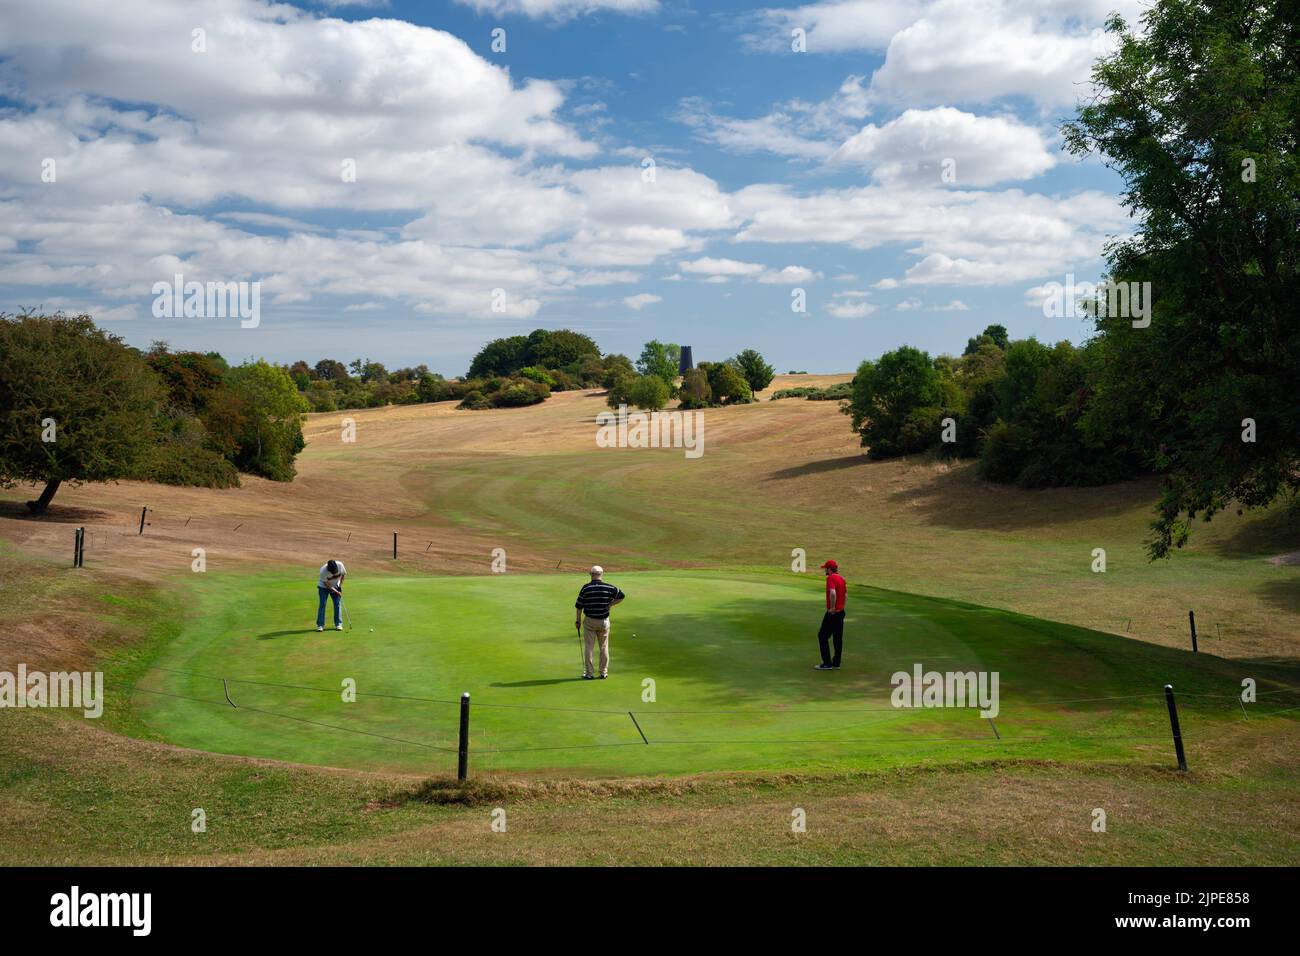 Golfers surrounded by parched grassland playing on putting green freshly watered during extreme heatwave on the Westwood, Beverley, UK. Stock Photo